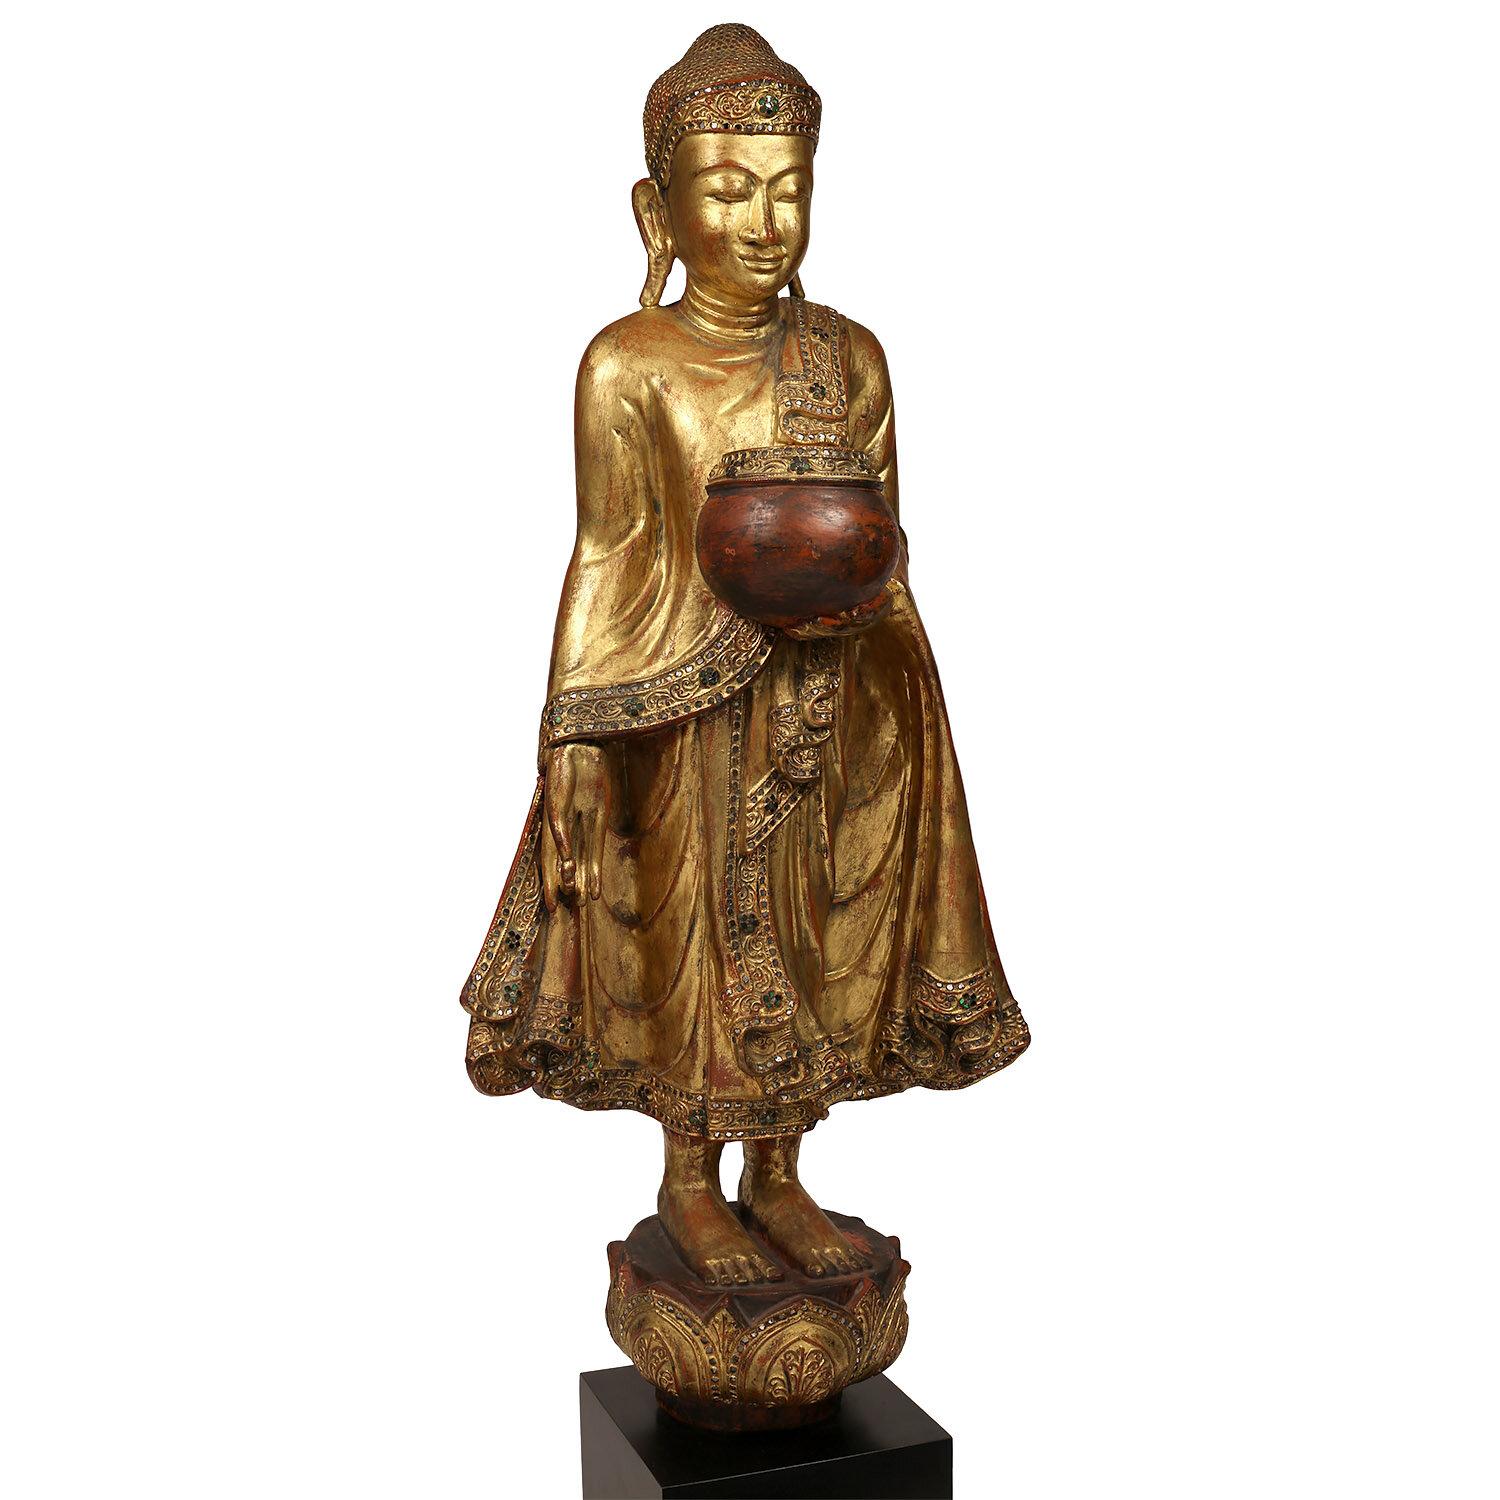 Vintage Burmese Mandalay-style Bejeweled Buddha

This is the classic Burmese representation of Buddha. Depicted in his youth with a sweet face, a friendly, accepting countenance, flowing robes and holding an alms bowl. In Myanmar, formerly Burma,